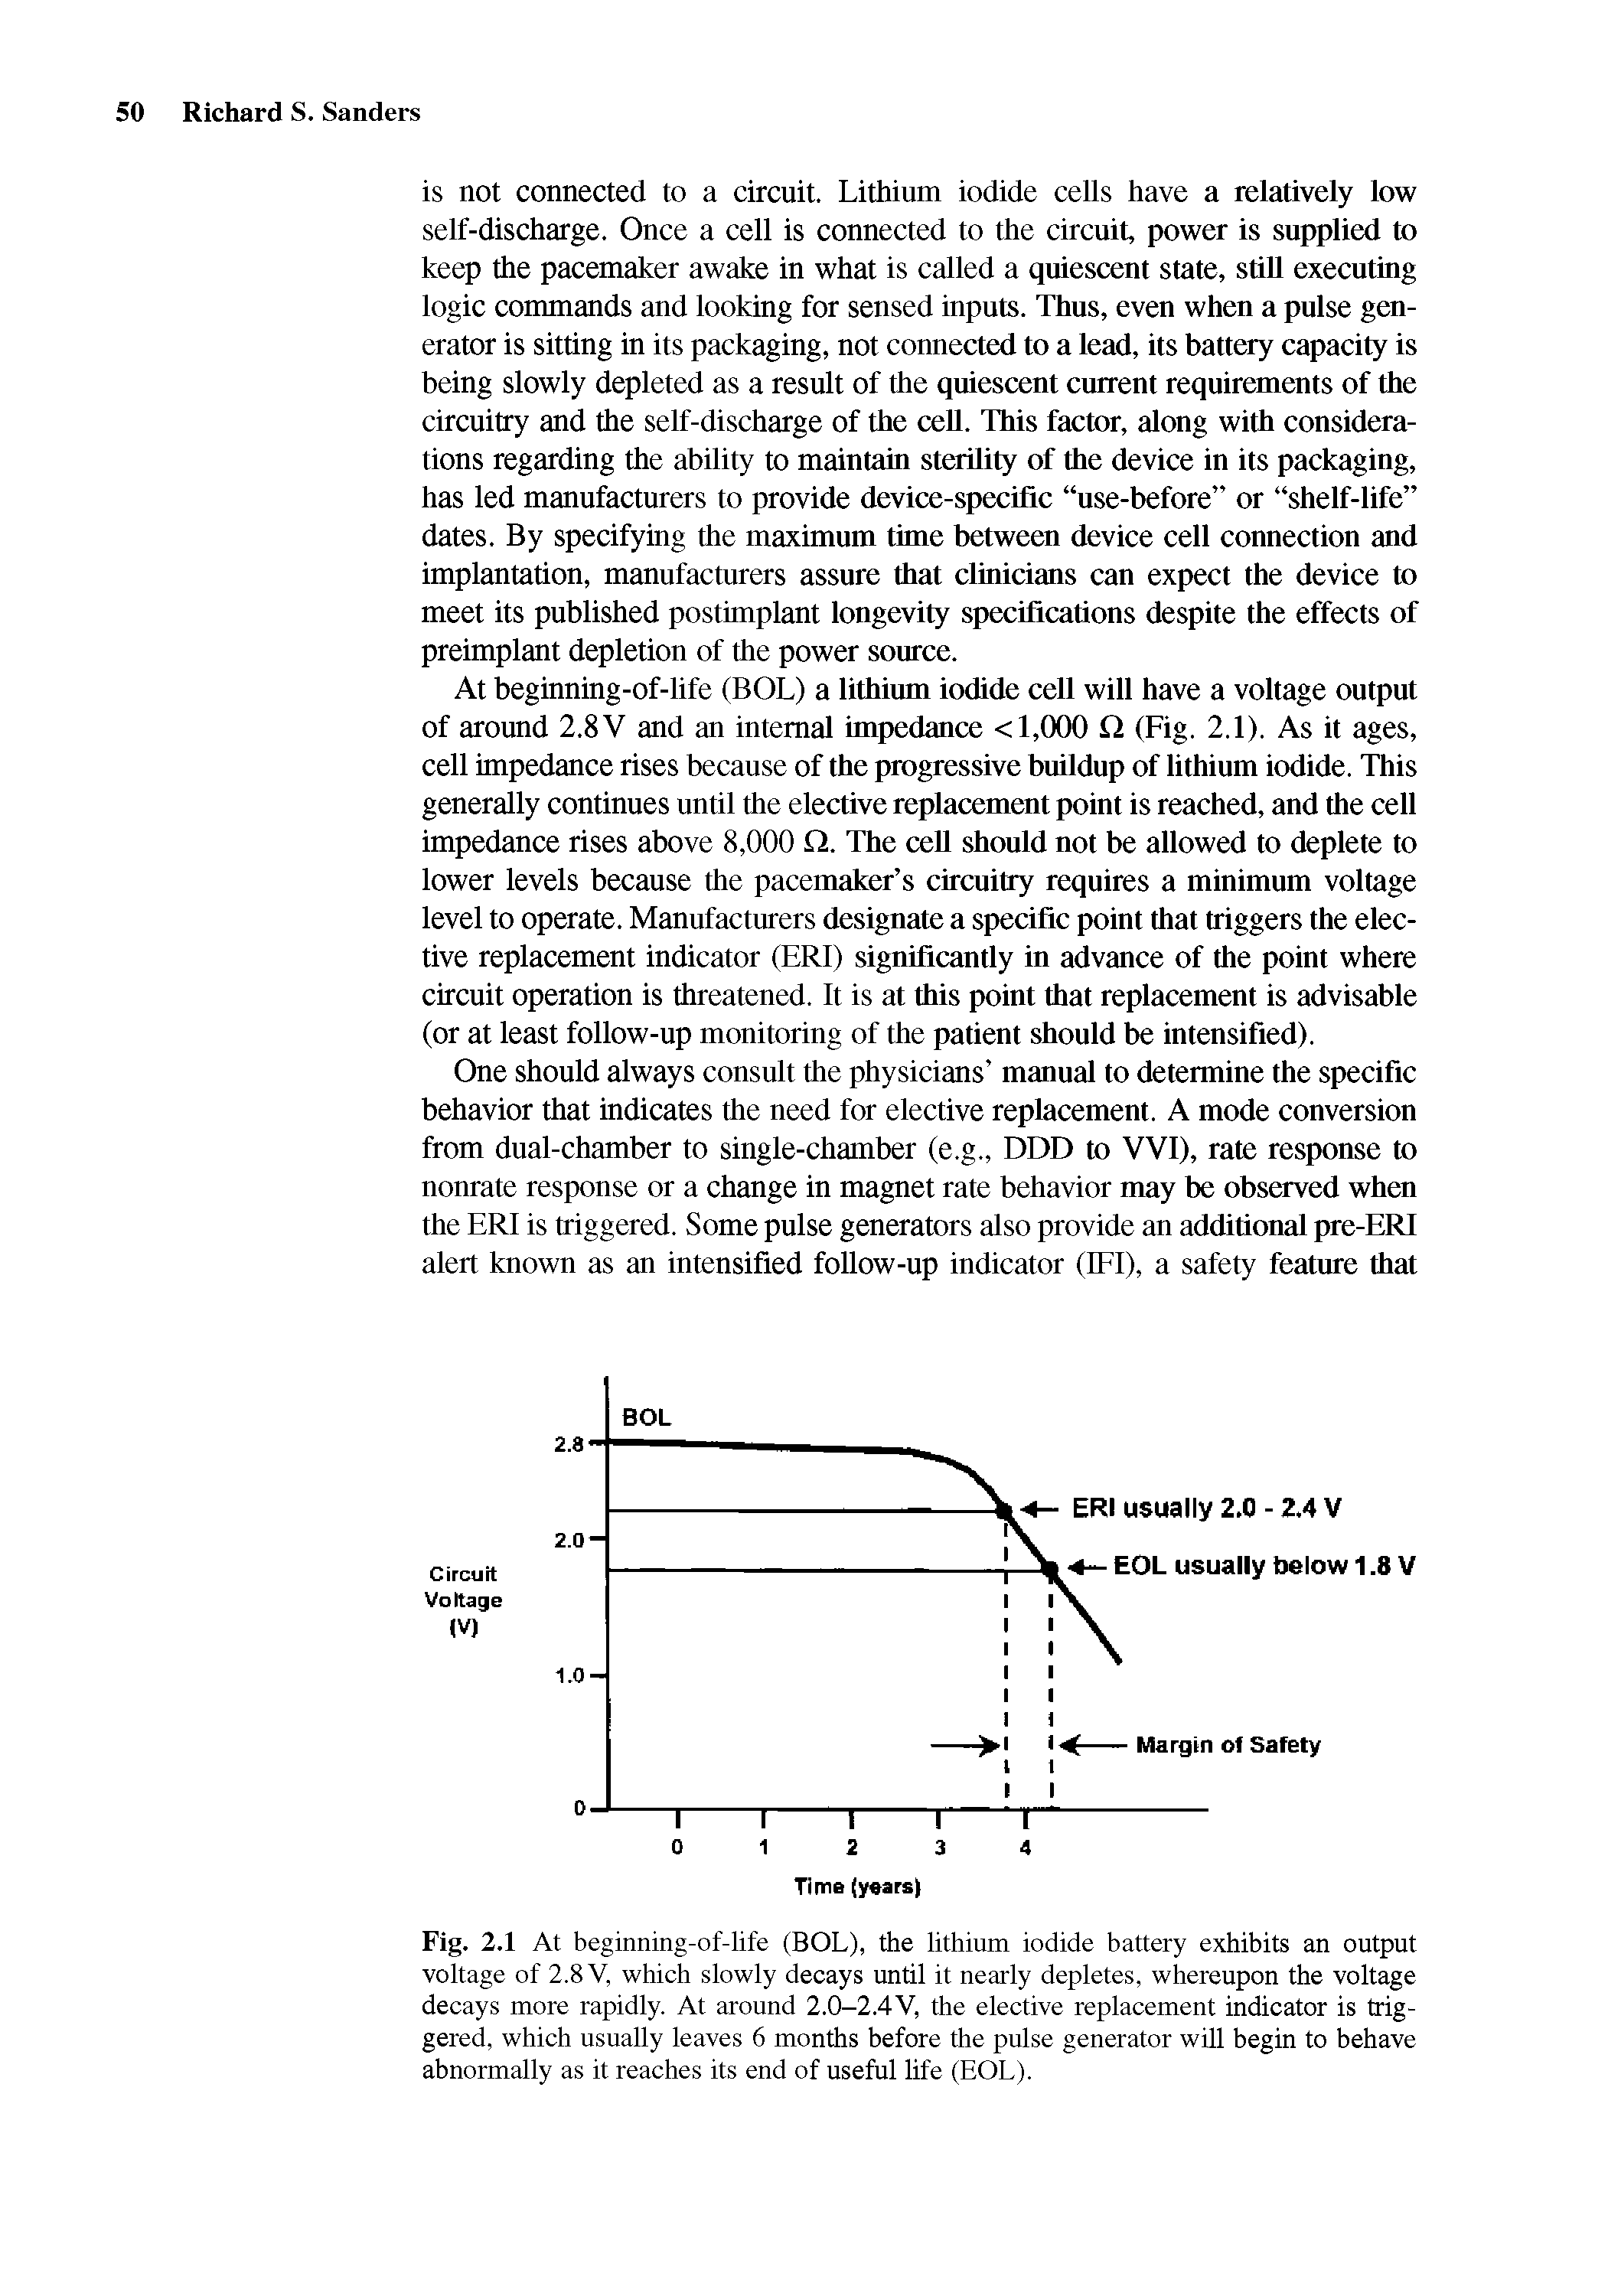 Fig. 2.1 At beginning-of-life (BOL), the lithium iodide battery exhibits an output voltage of 2.8 V, which slowly decays until it nearly depletes, whereupon the voltage decays more rapidly. At around 2.0-2.4V, the elective replacement indicator is triggered, which usually leaves 6 months before the pulse generator will begin to behave abnormally as it reaches its end of useful life (EOL).